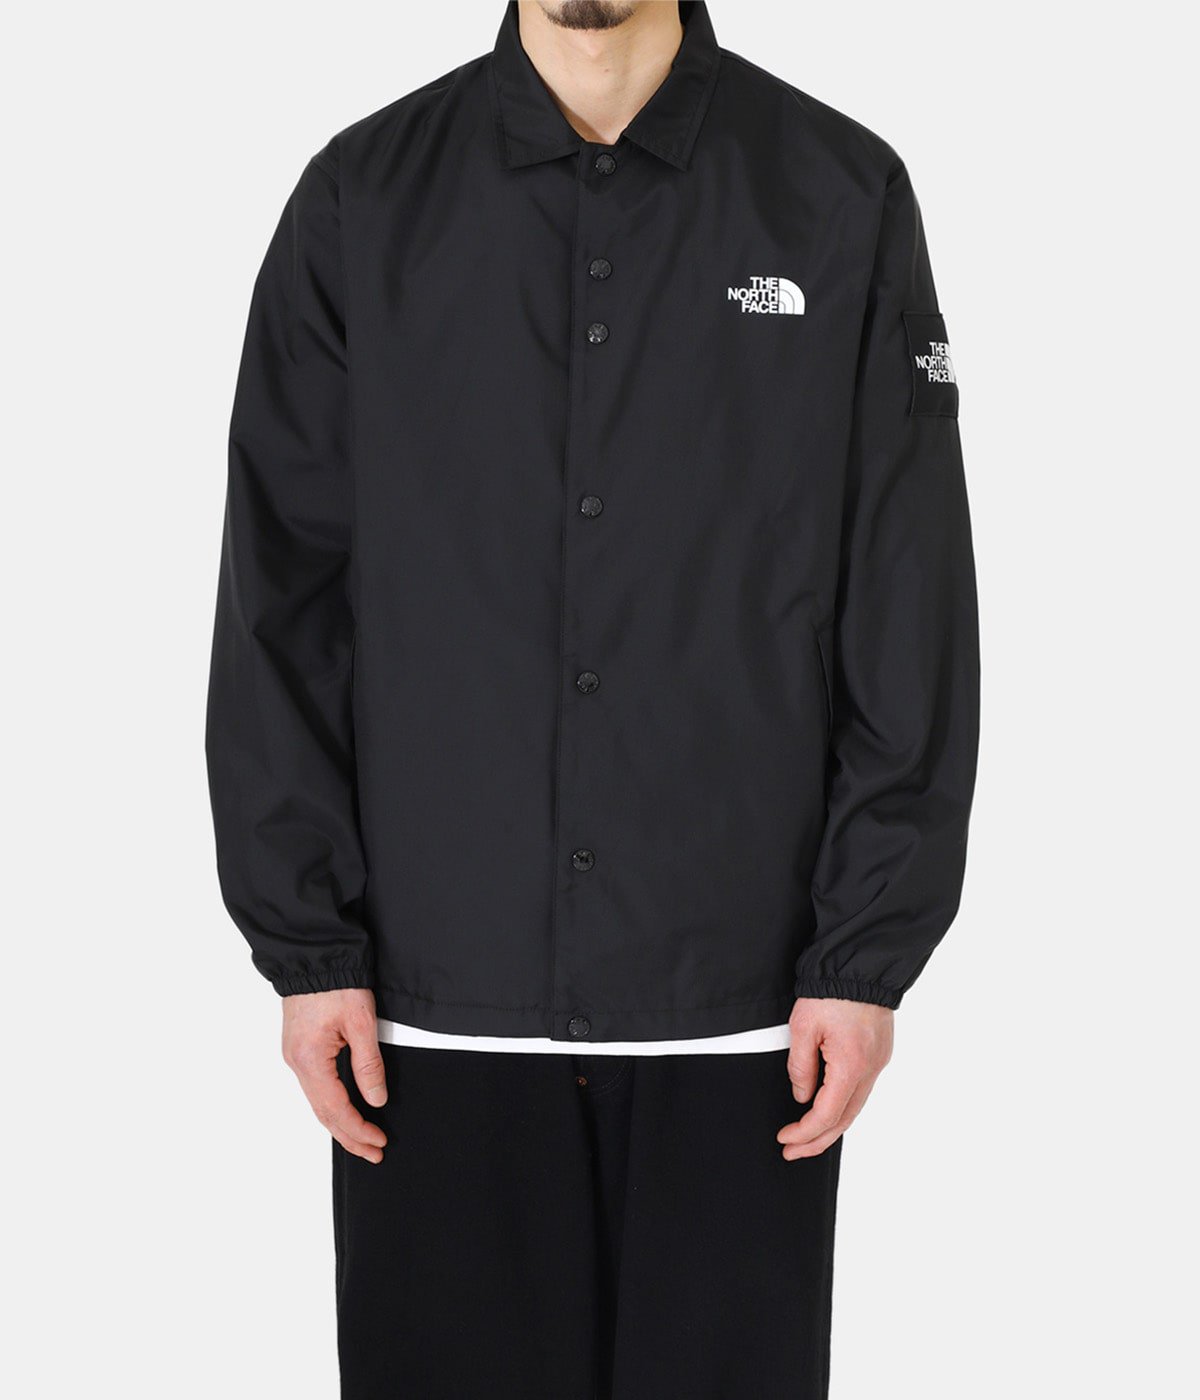 The Coach Jacket | THE NORTH FACE(ザ ノースフェイス) / アウター 